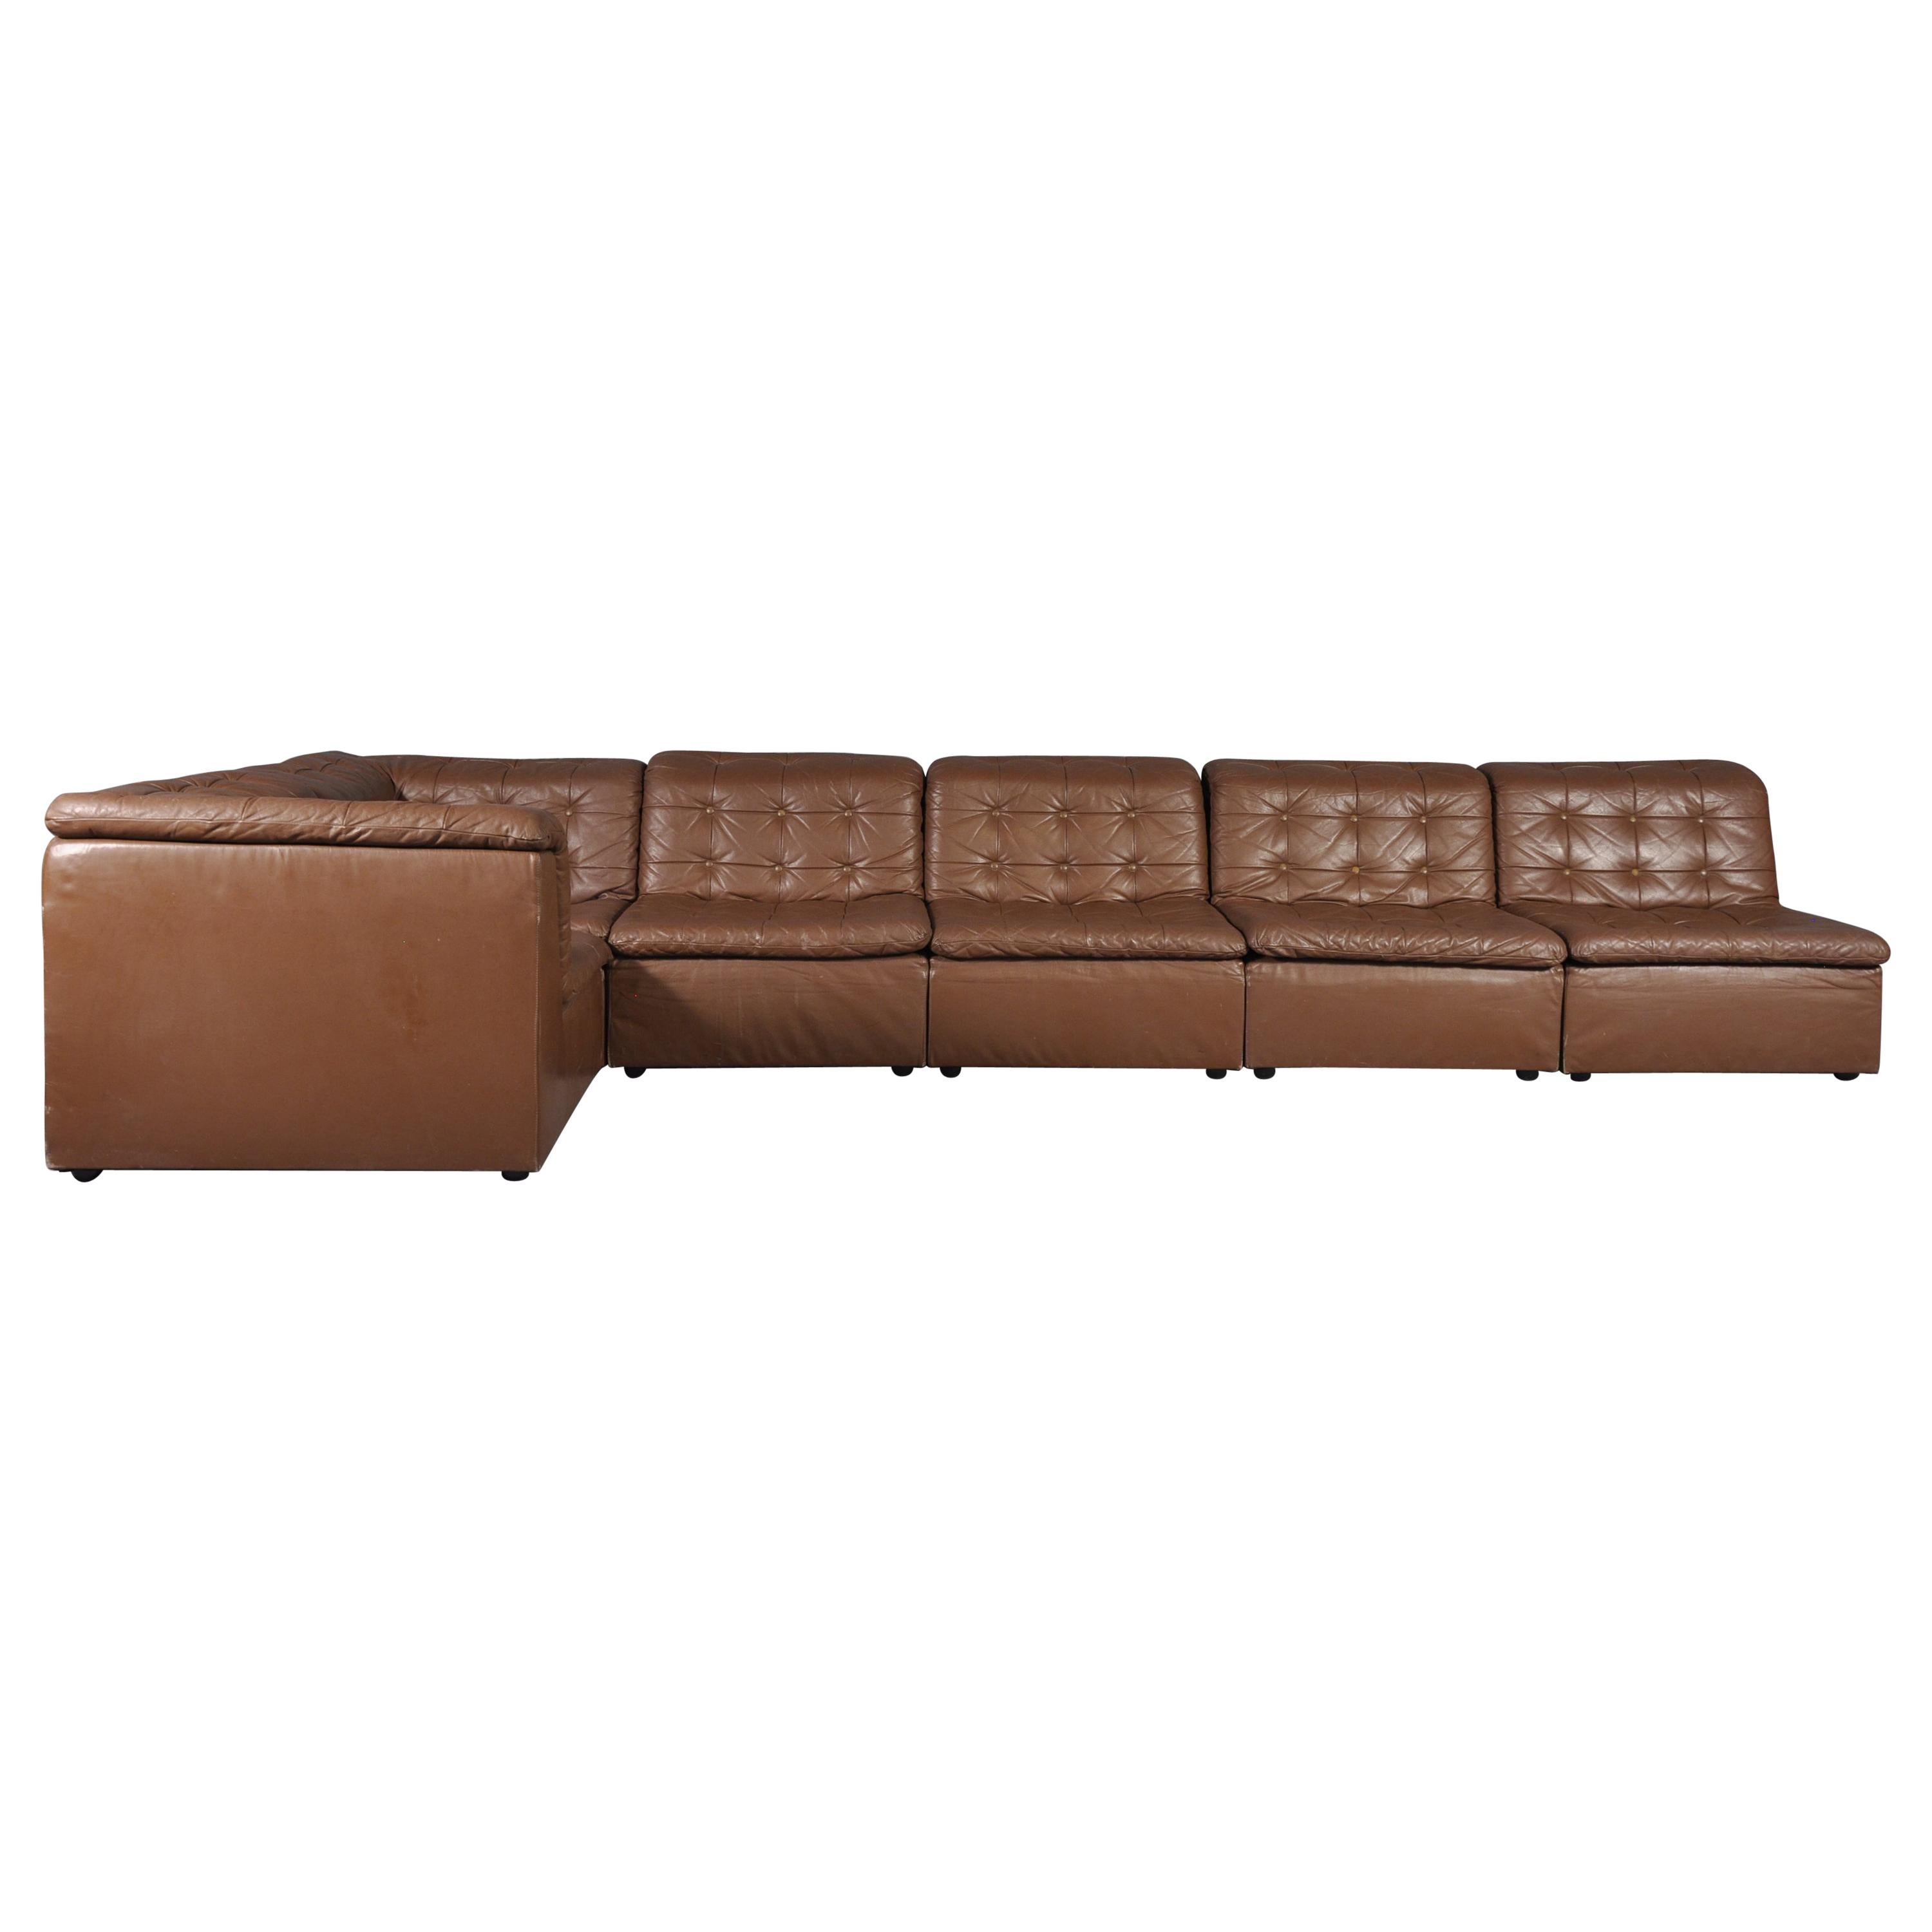 Cognac Leather “De Sede Style” Patchwork Modular Sofa from Laauser, Germany 1970 For Sale